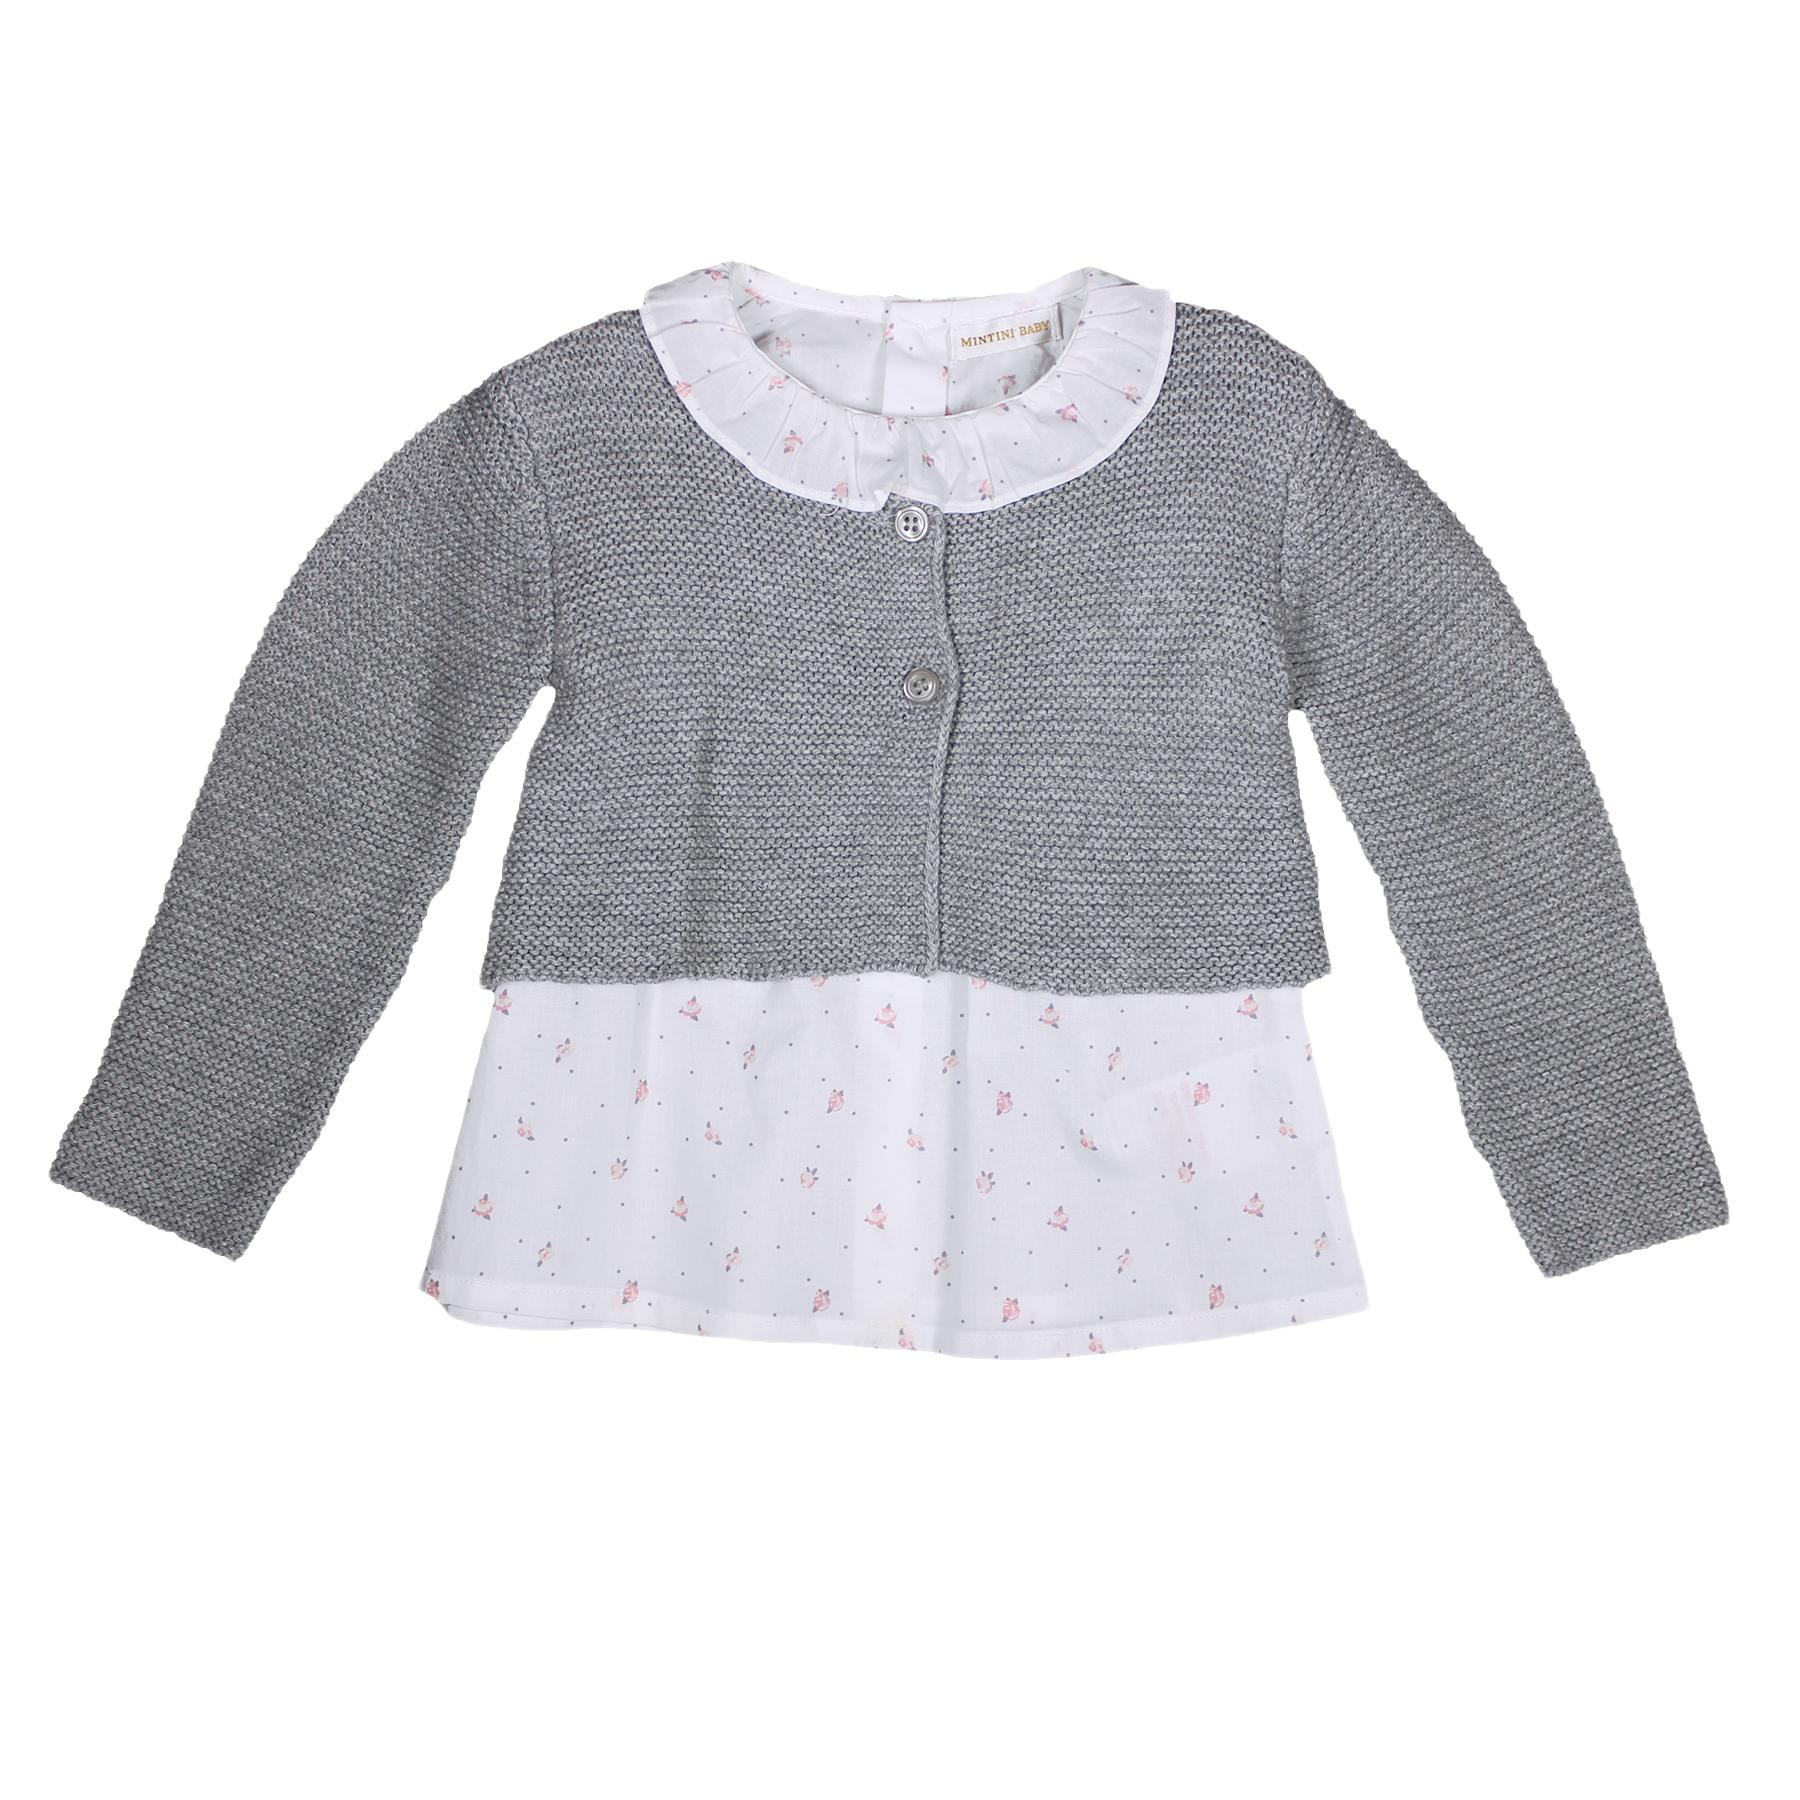 Mintini Baby Grey Cardigan and White Blouse